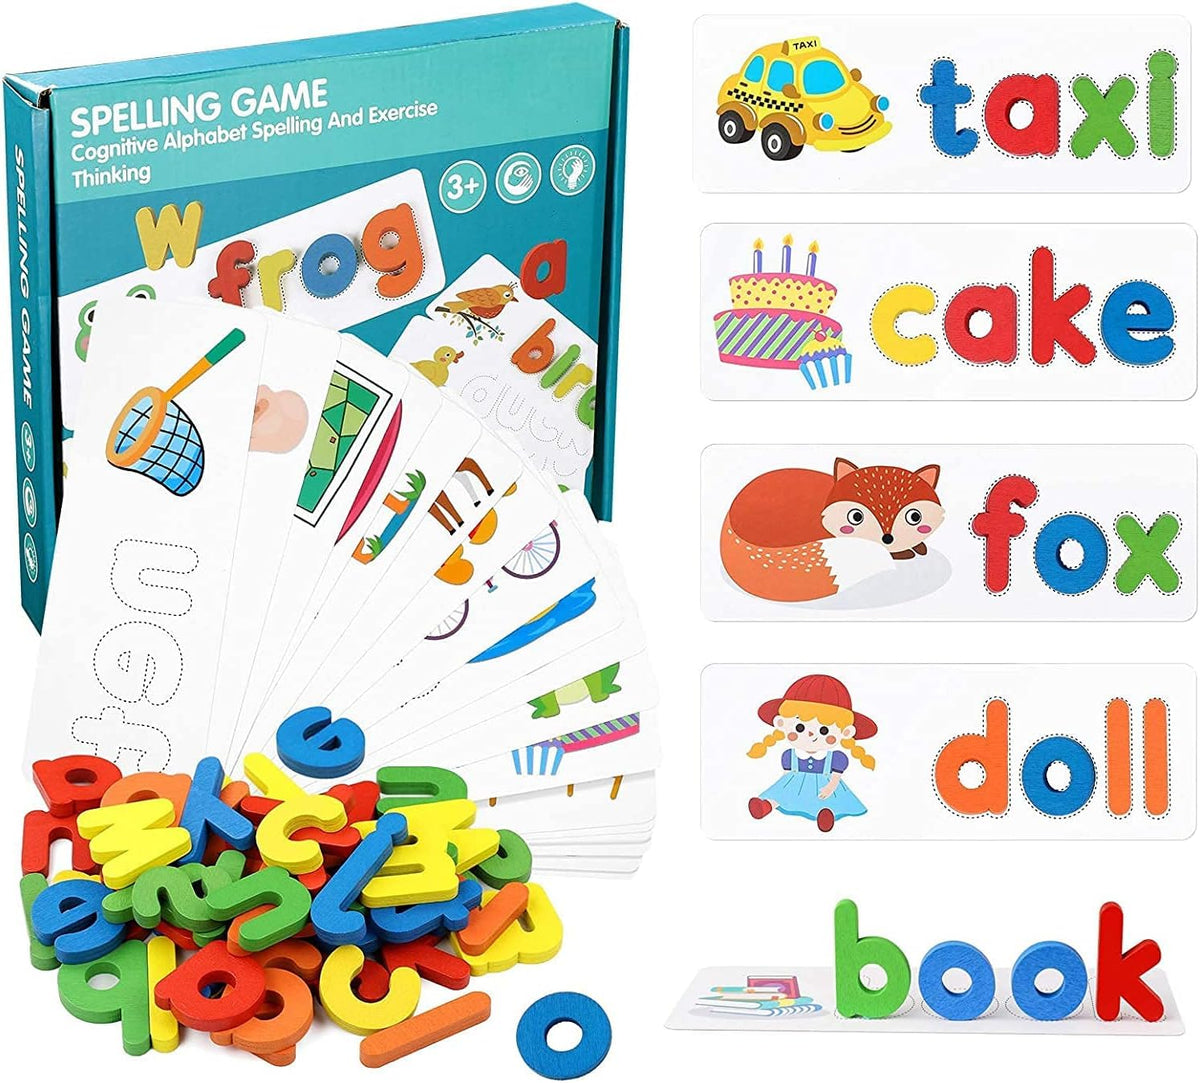 Spelling Games for Kids,Alphabet Puzzle Game Toy Set with 28 Double-Sided Word Pattern Cognition Cards & 52 Wooden Letter Blocks,Preschool Vocabulary Spelling for Kids Toddlers